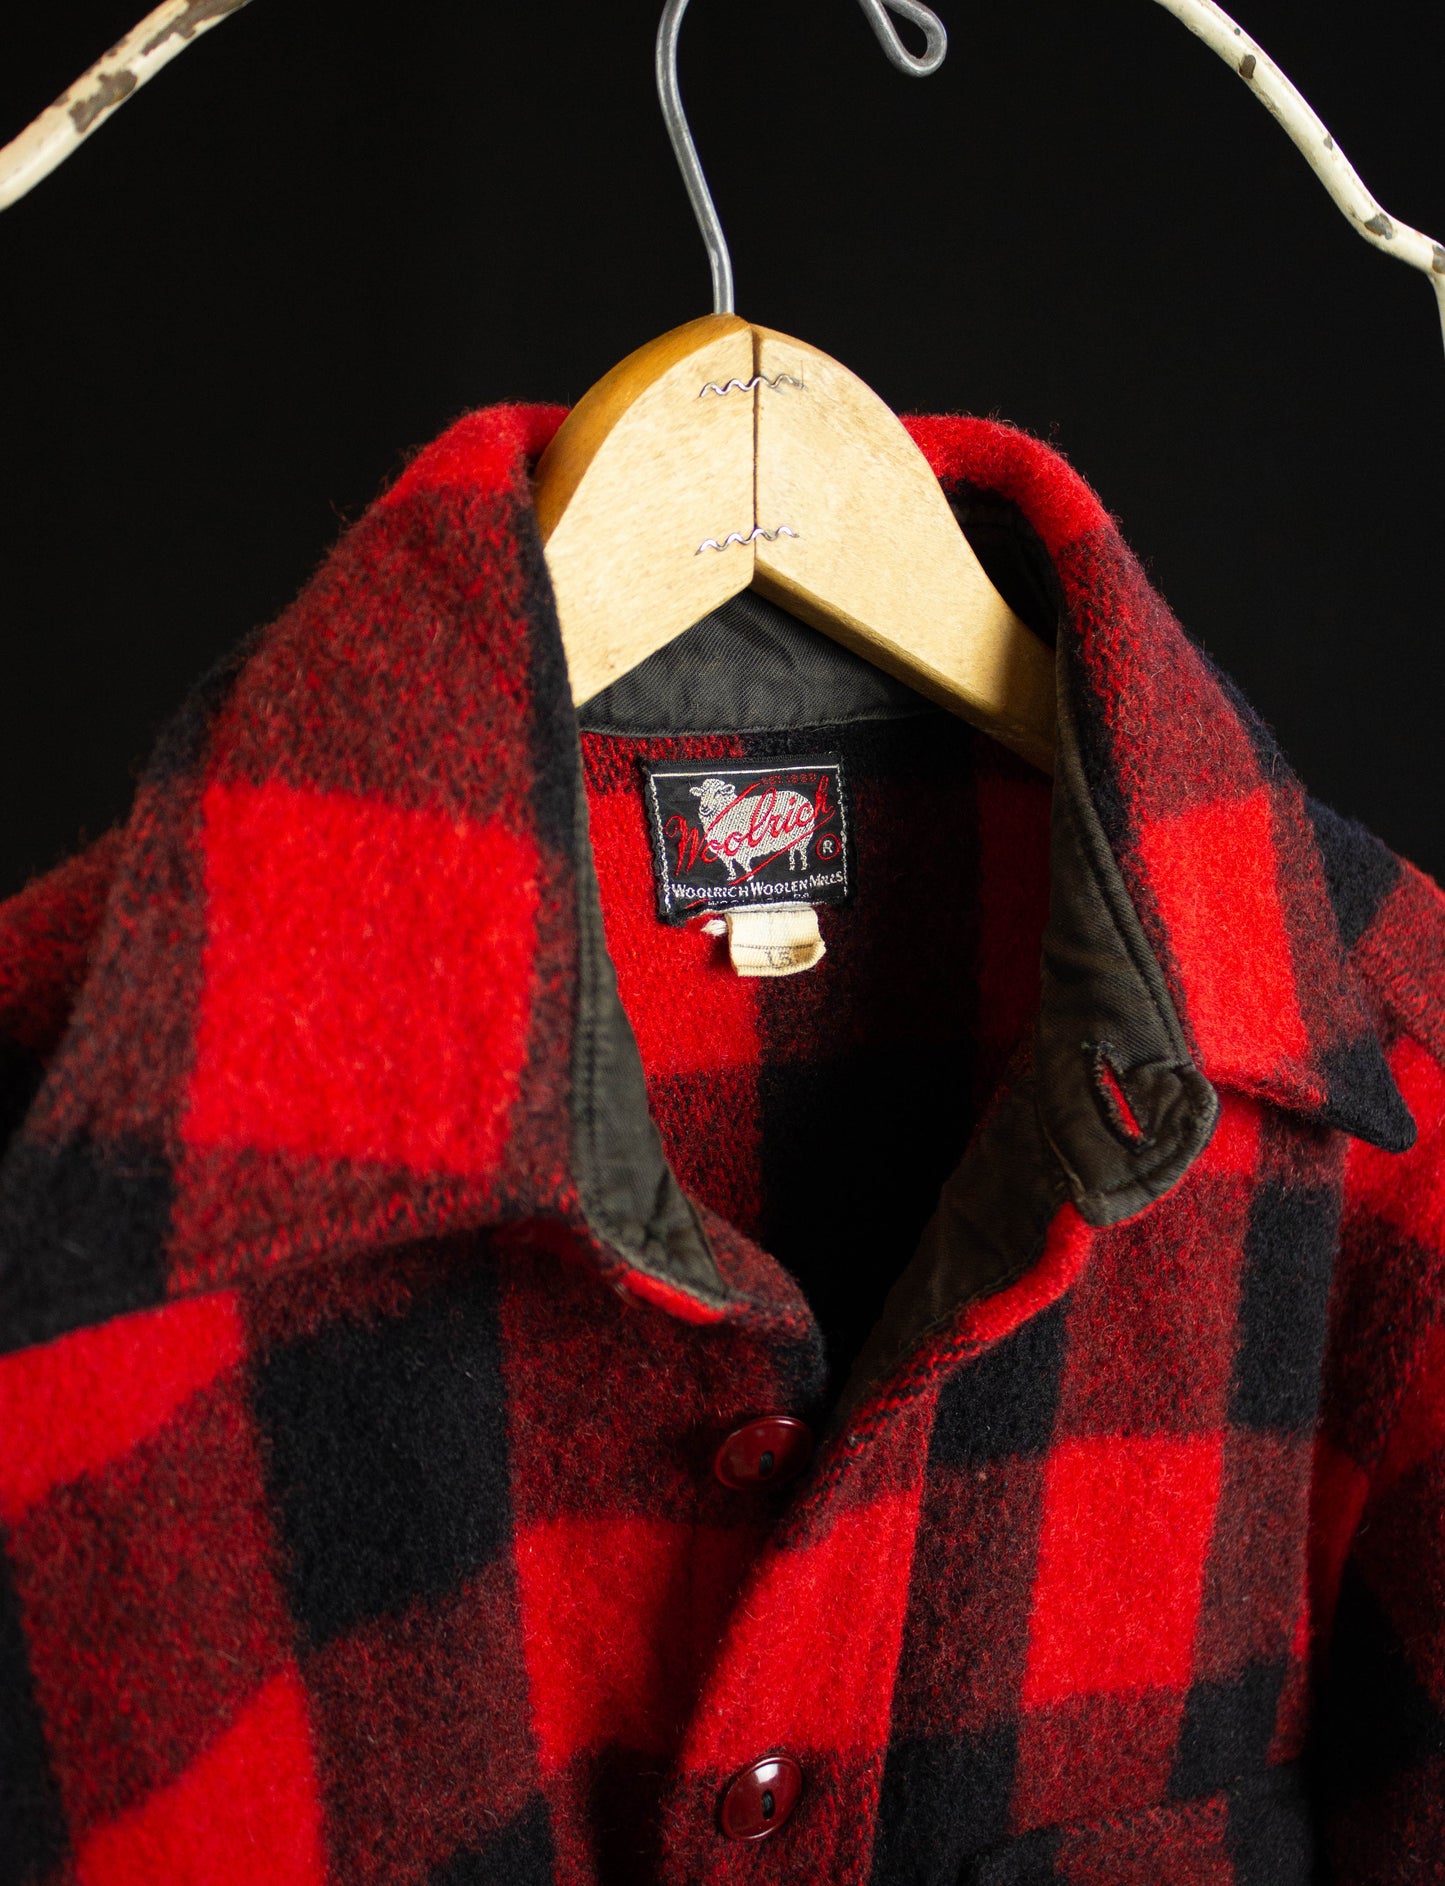 Vintage Woolrich Buffalo Plaid Wool Flannel Shirt 50s Red and Black Small-Medium